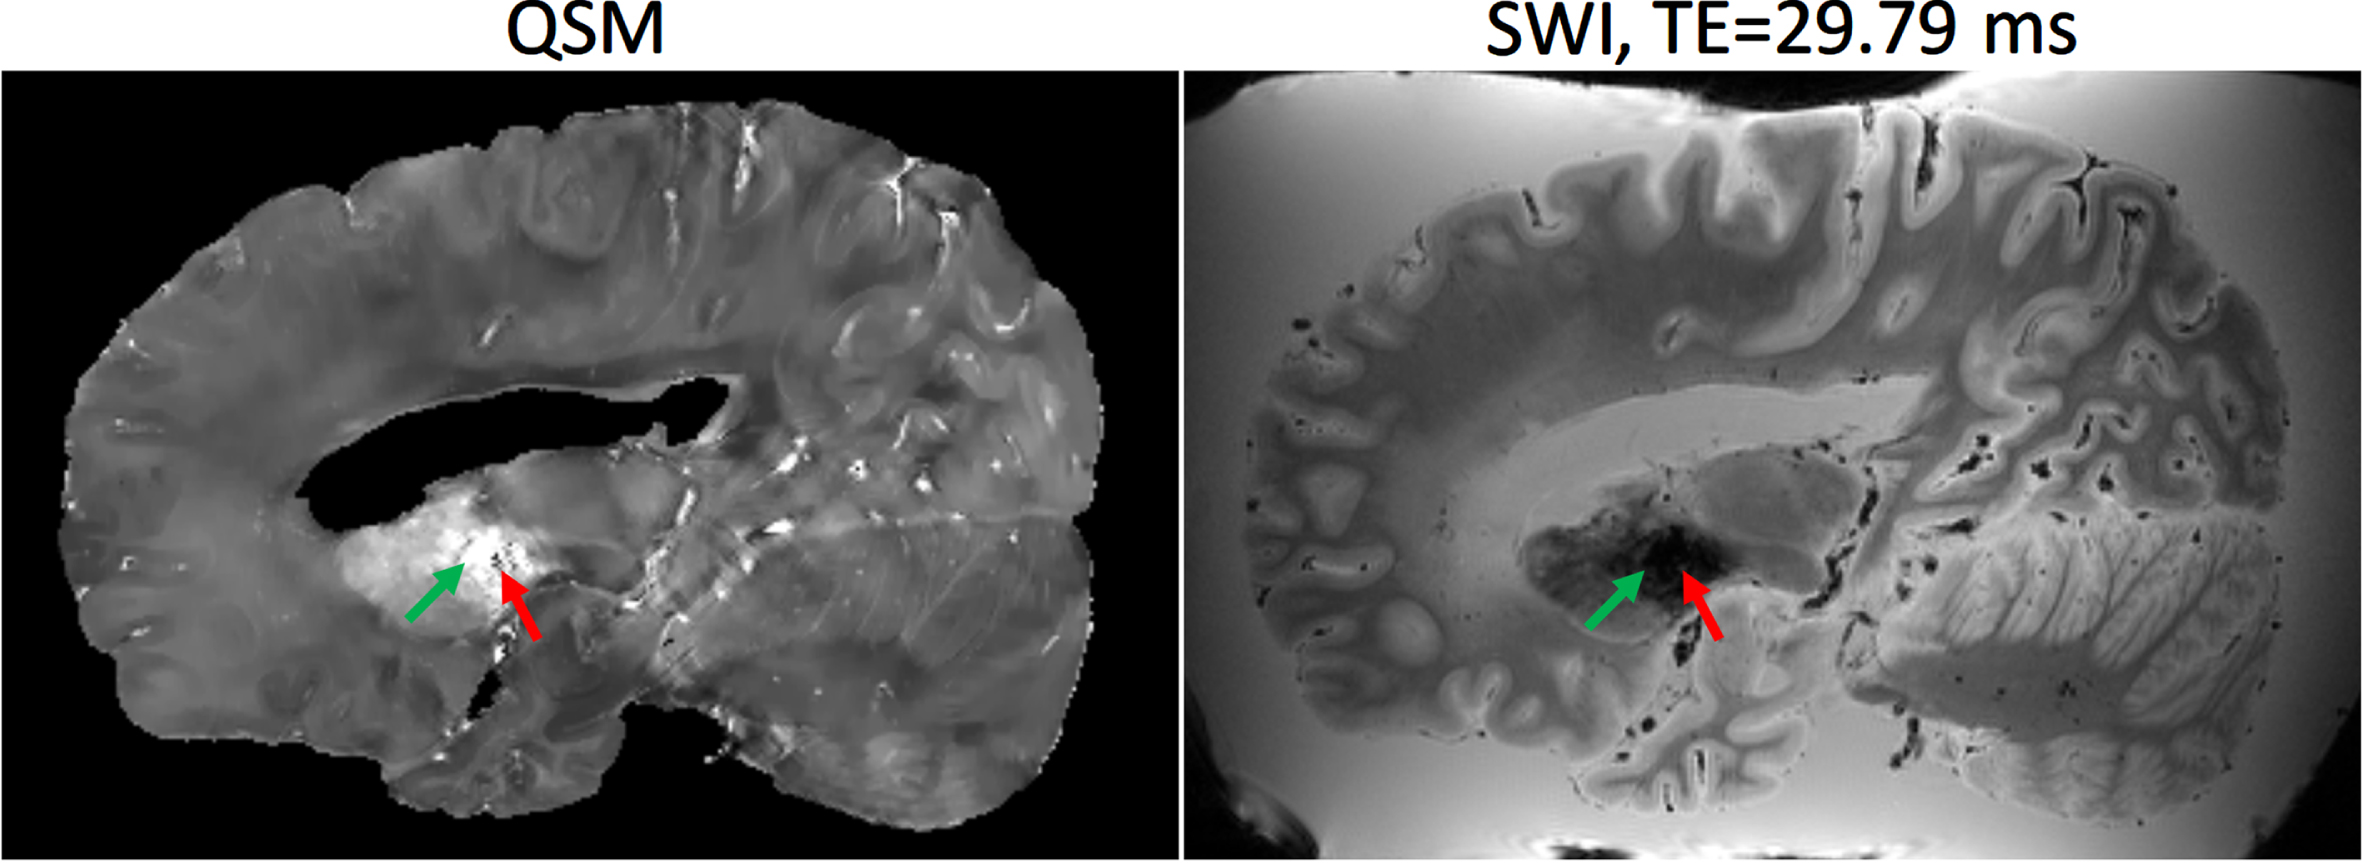 Example of Quantitative Susceptibility Mapping (QSM) (left) and Susceptibility Weighted Image (SWI) at echo time = 29.79 ms (right). The basal ganglia (green arrow) typically has a higher concentration of paramagnetic iron which exhibit hyperintensities on QSM, whereas diamagnetic calcifications exhibit hypointensities (red arrow).